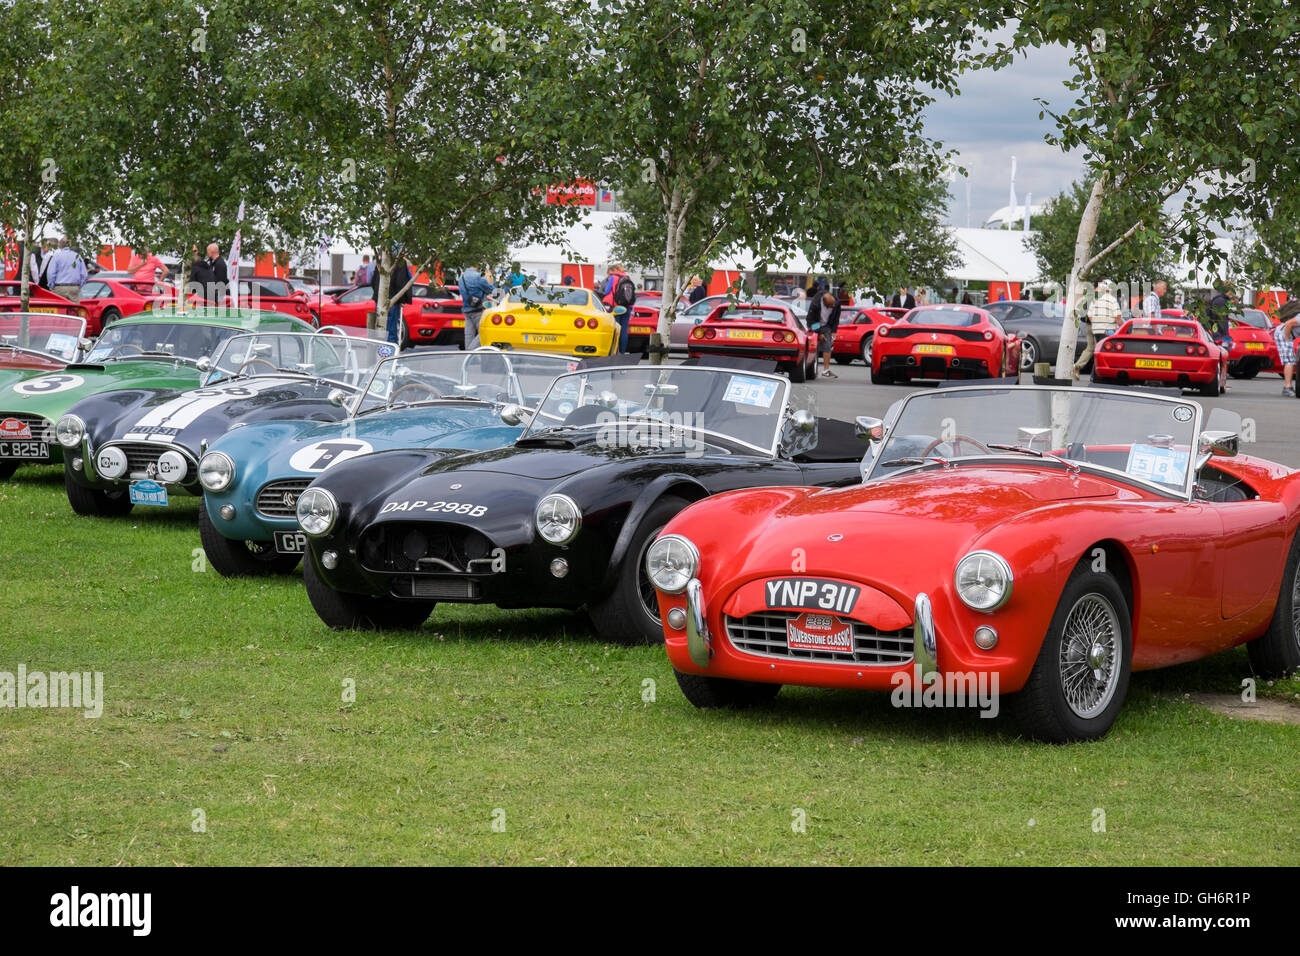 AC Cobra sports cars lined up at 2016 Silverstone Classic event, England, UK Stock Photo